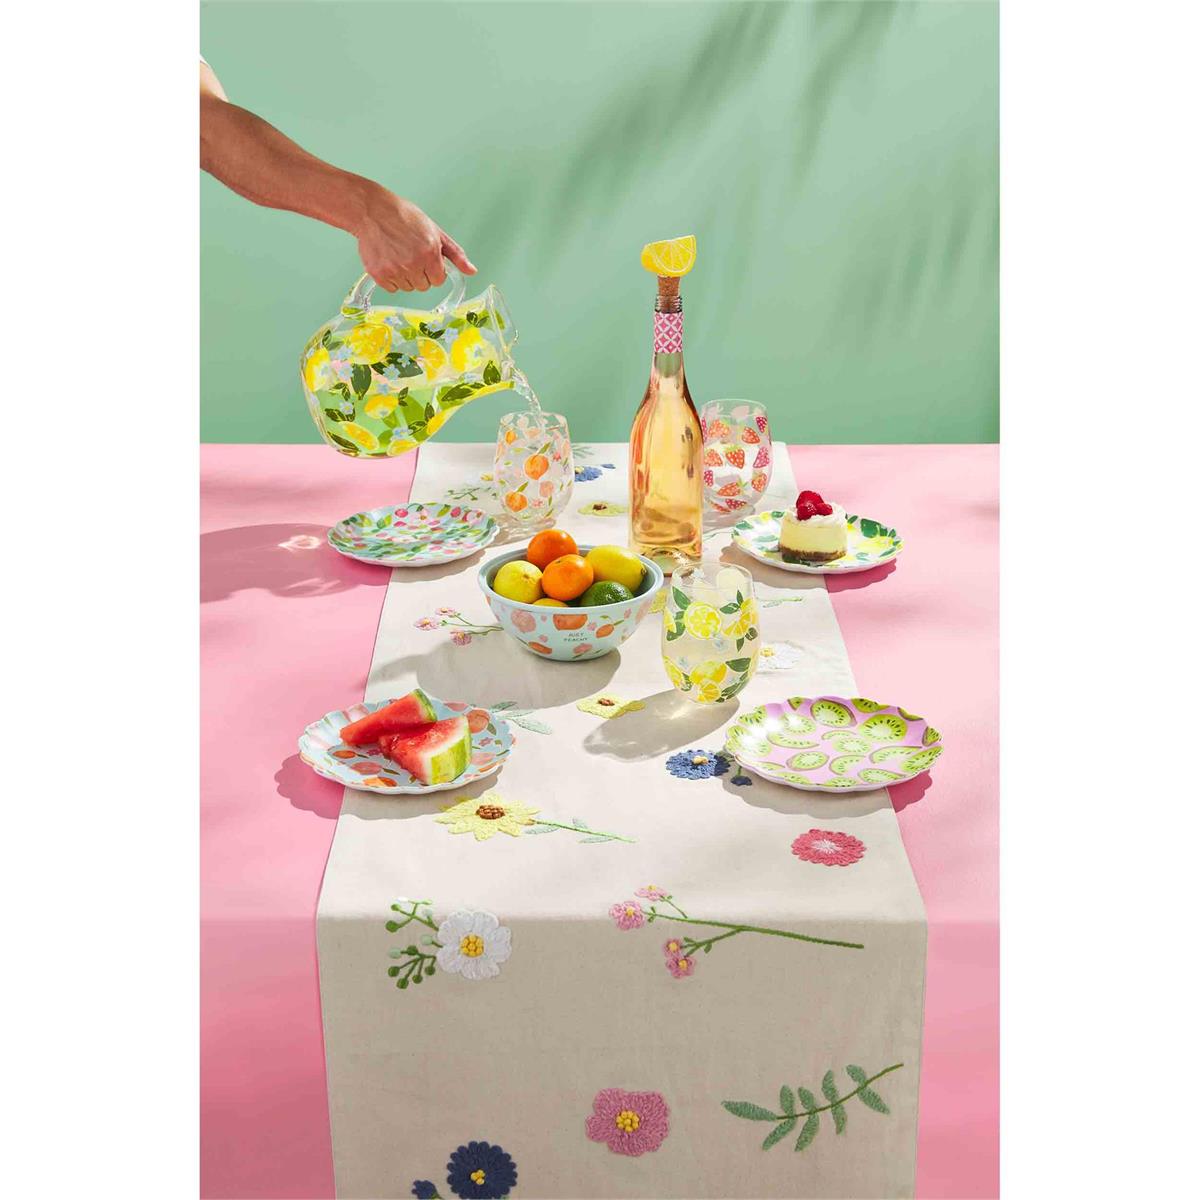 a person using the lemon pitcher to fill up glasses that are sitting in a table setting next to plates, bowl, and wine bottle on a pink table cloth with a floral runner on top